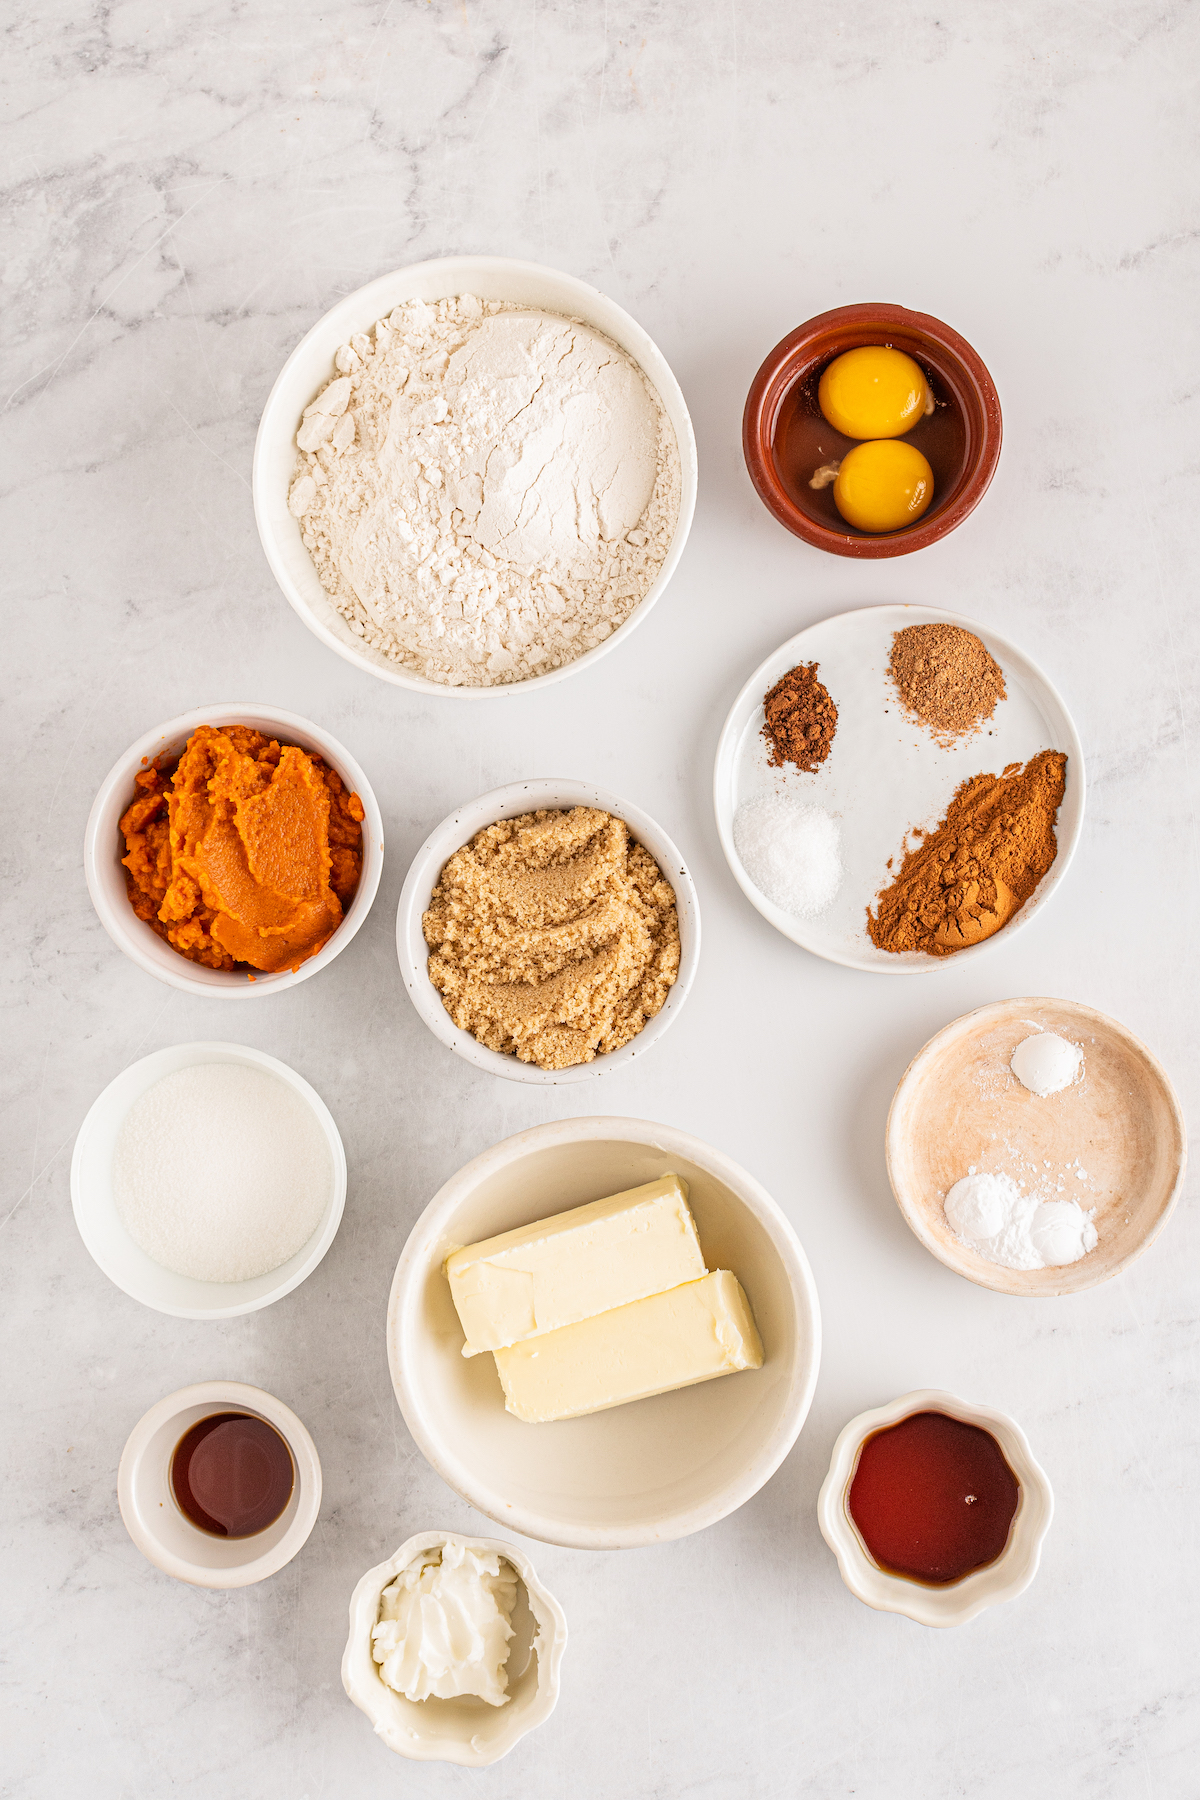 All of the ingredients for Pumpkin Cookies laid out in bowls on the counter.